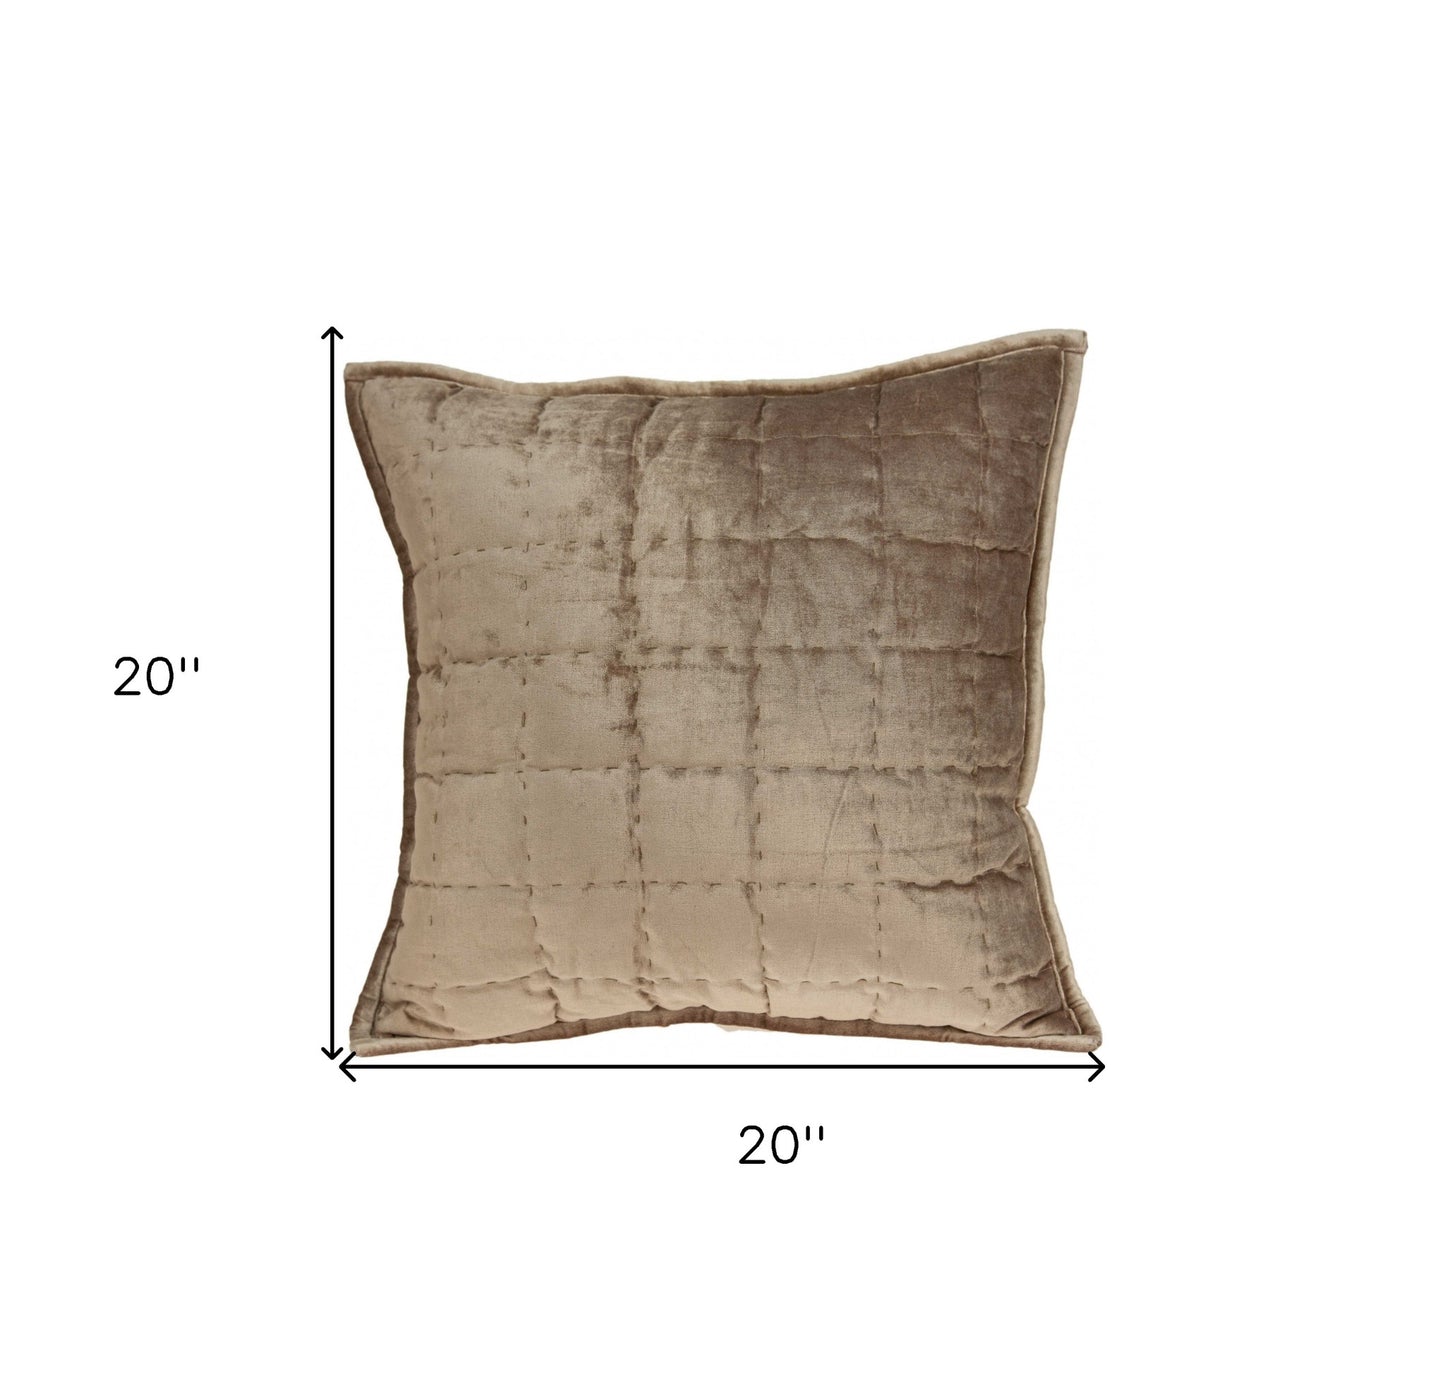 20" X 7" X 20" Transitional Taupe Solid Quilted Pillow Cover With Poly Insert